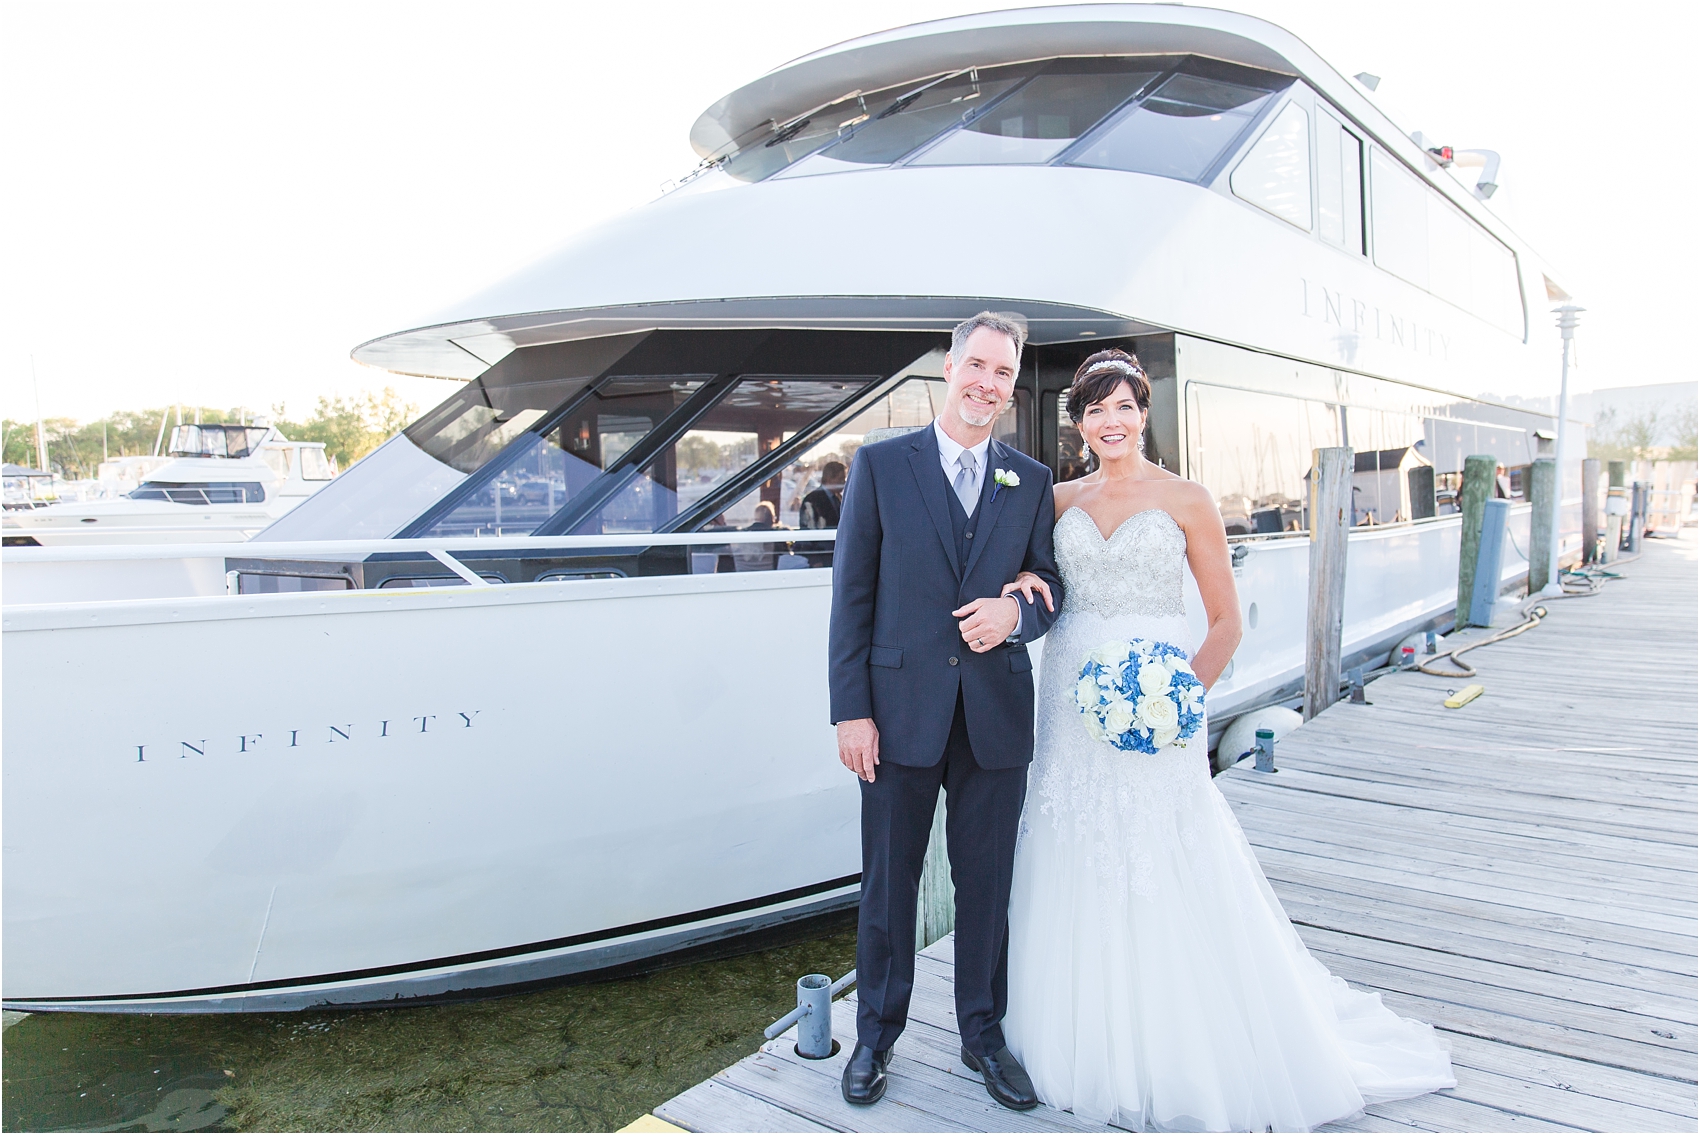 classic-natuical-inspired-wedding-photos-on-infinity-ovation-yacht-in-st-clair-shores-mi-by-courtney-carolyn-photography_0067.jpg